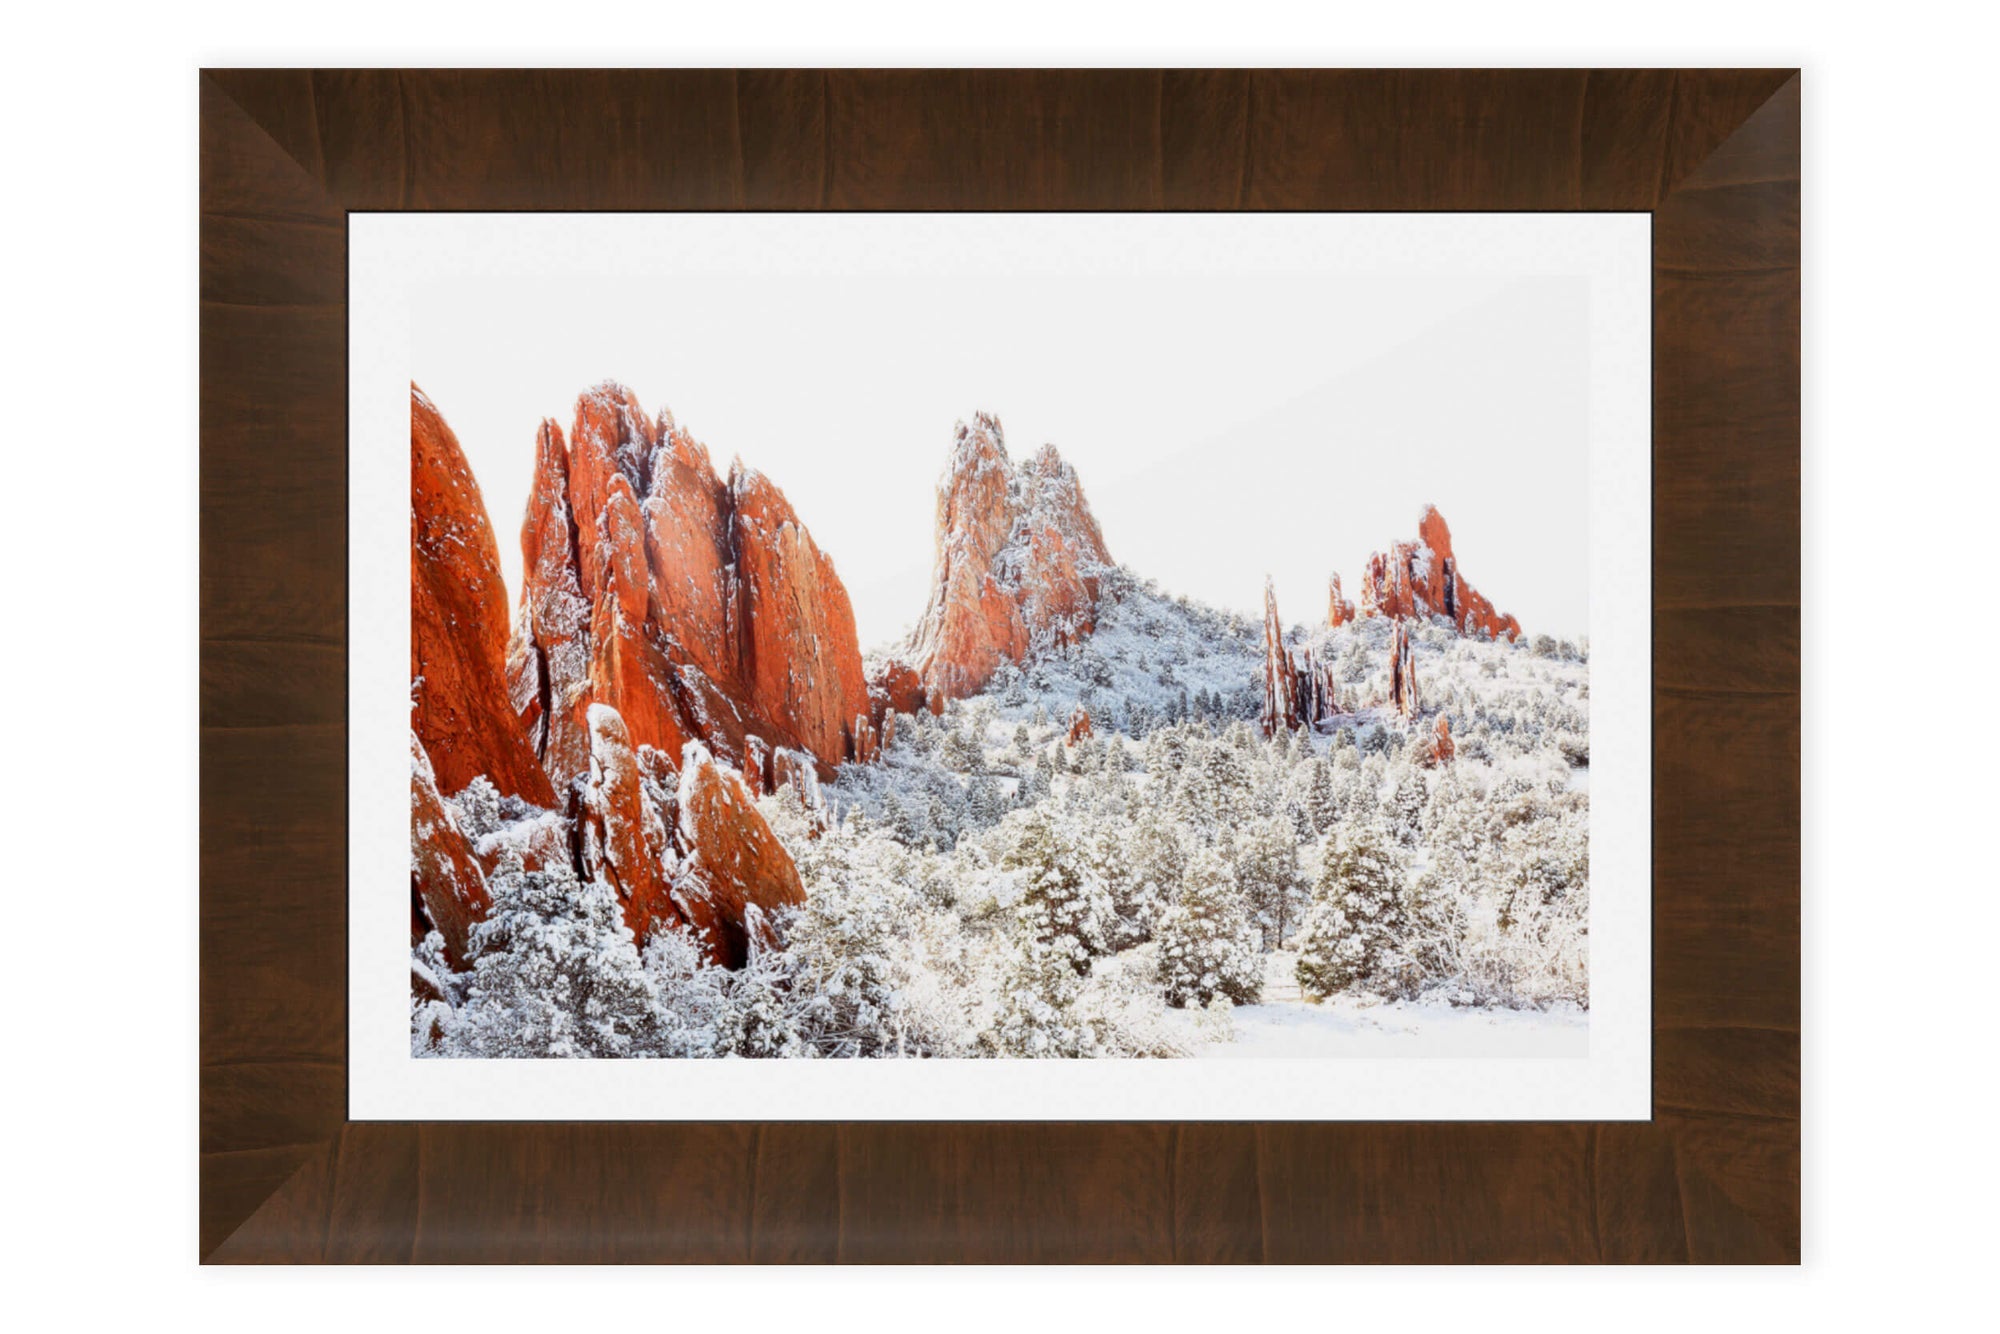 A piece of framed Colorado Springs art shows the Garden of the Gods in winter.